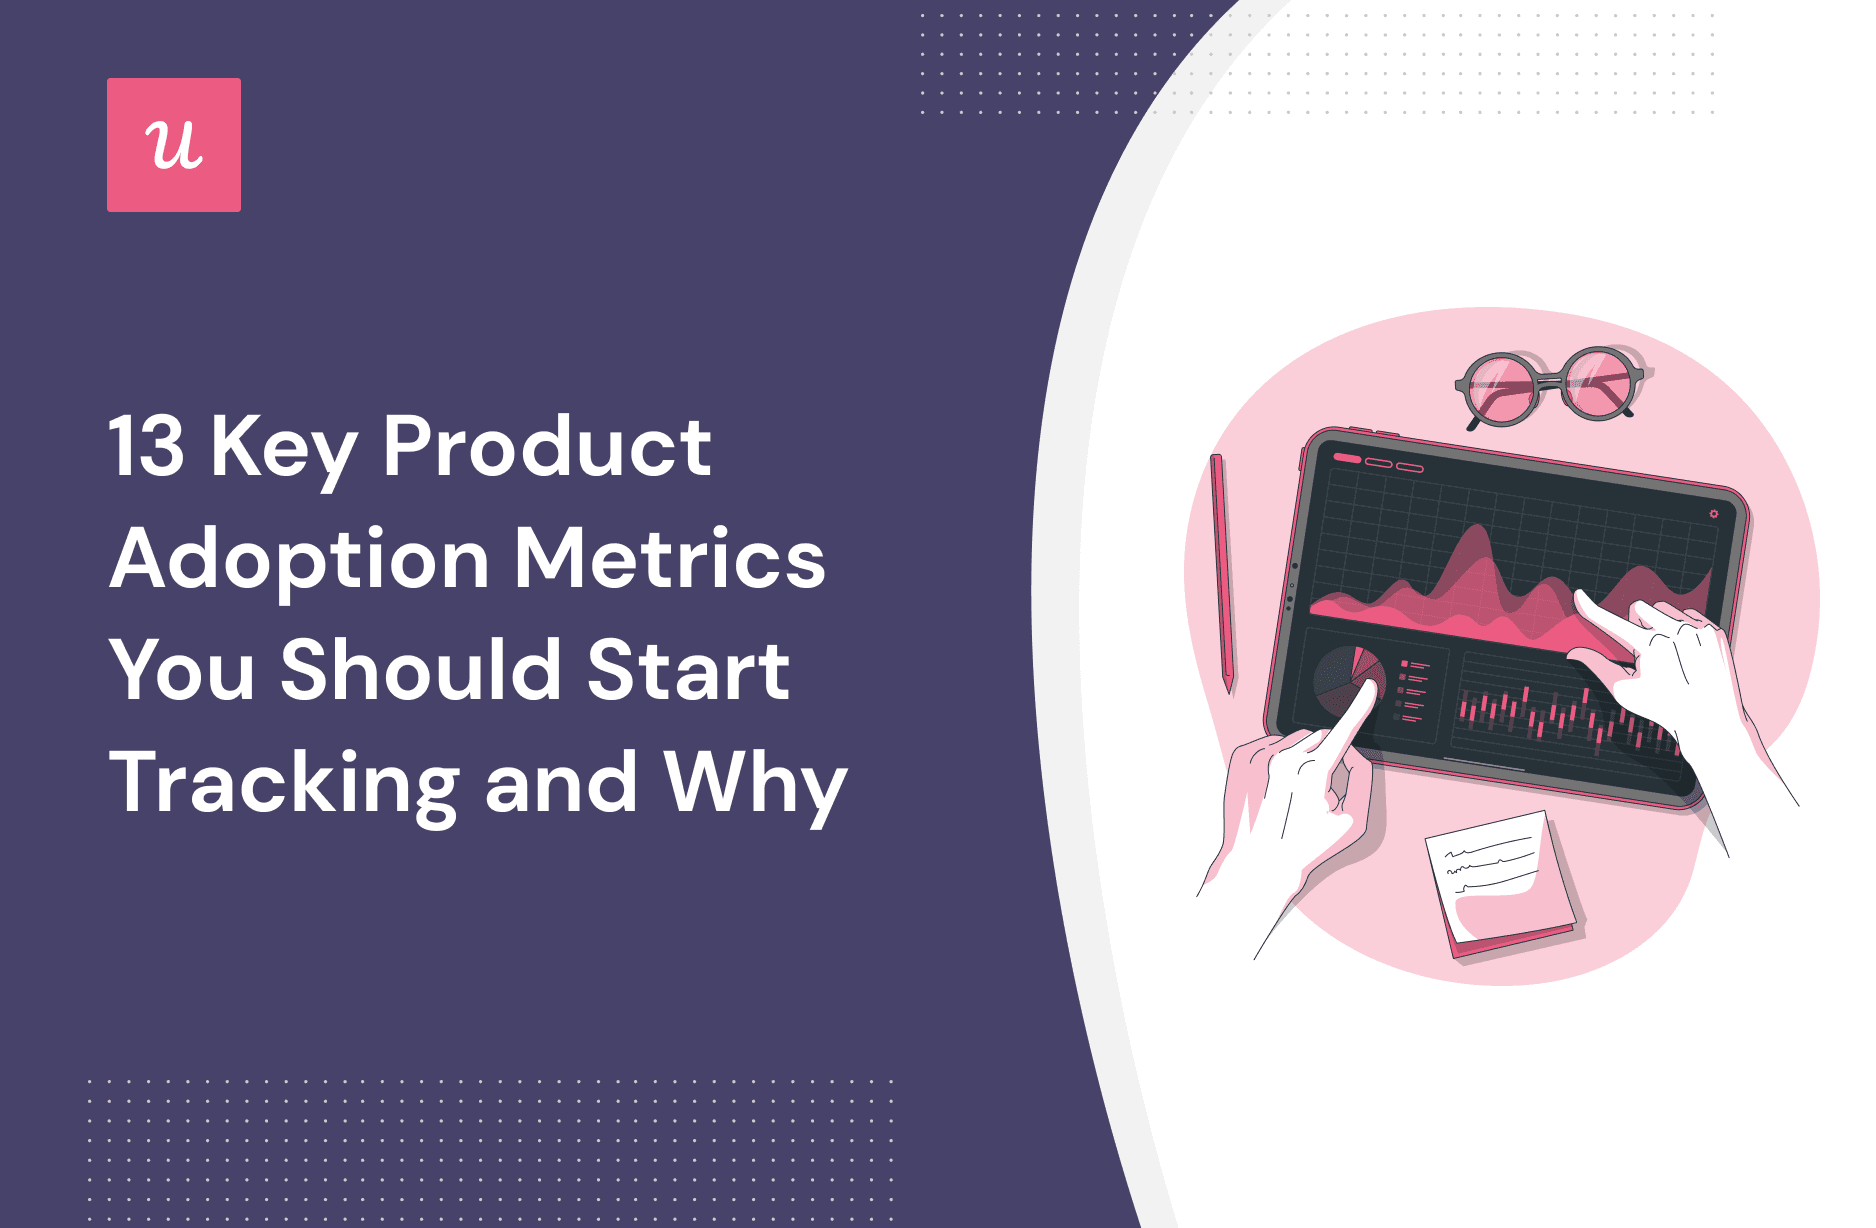 13 Key Product Adoption Metrics You Should Start Tracking And Why cover